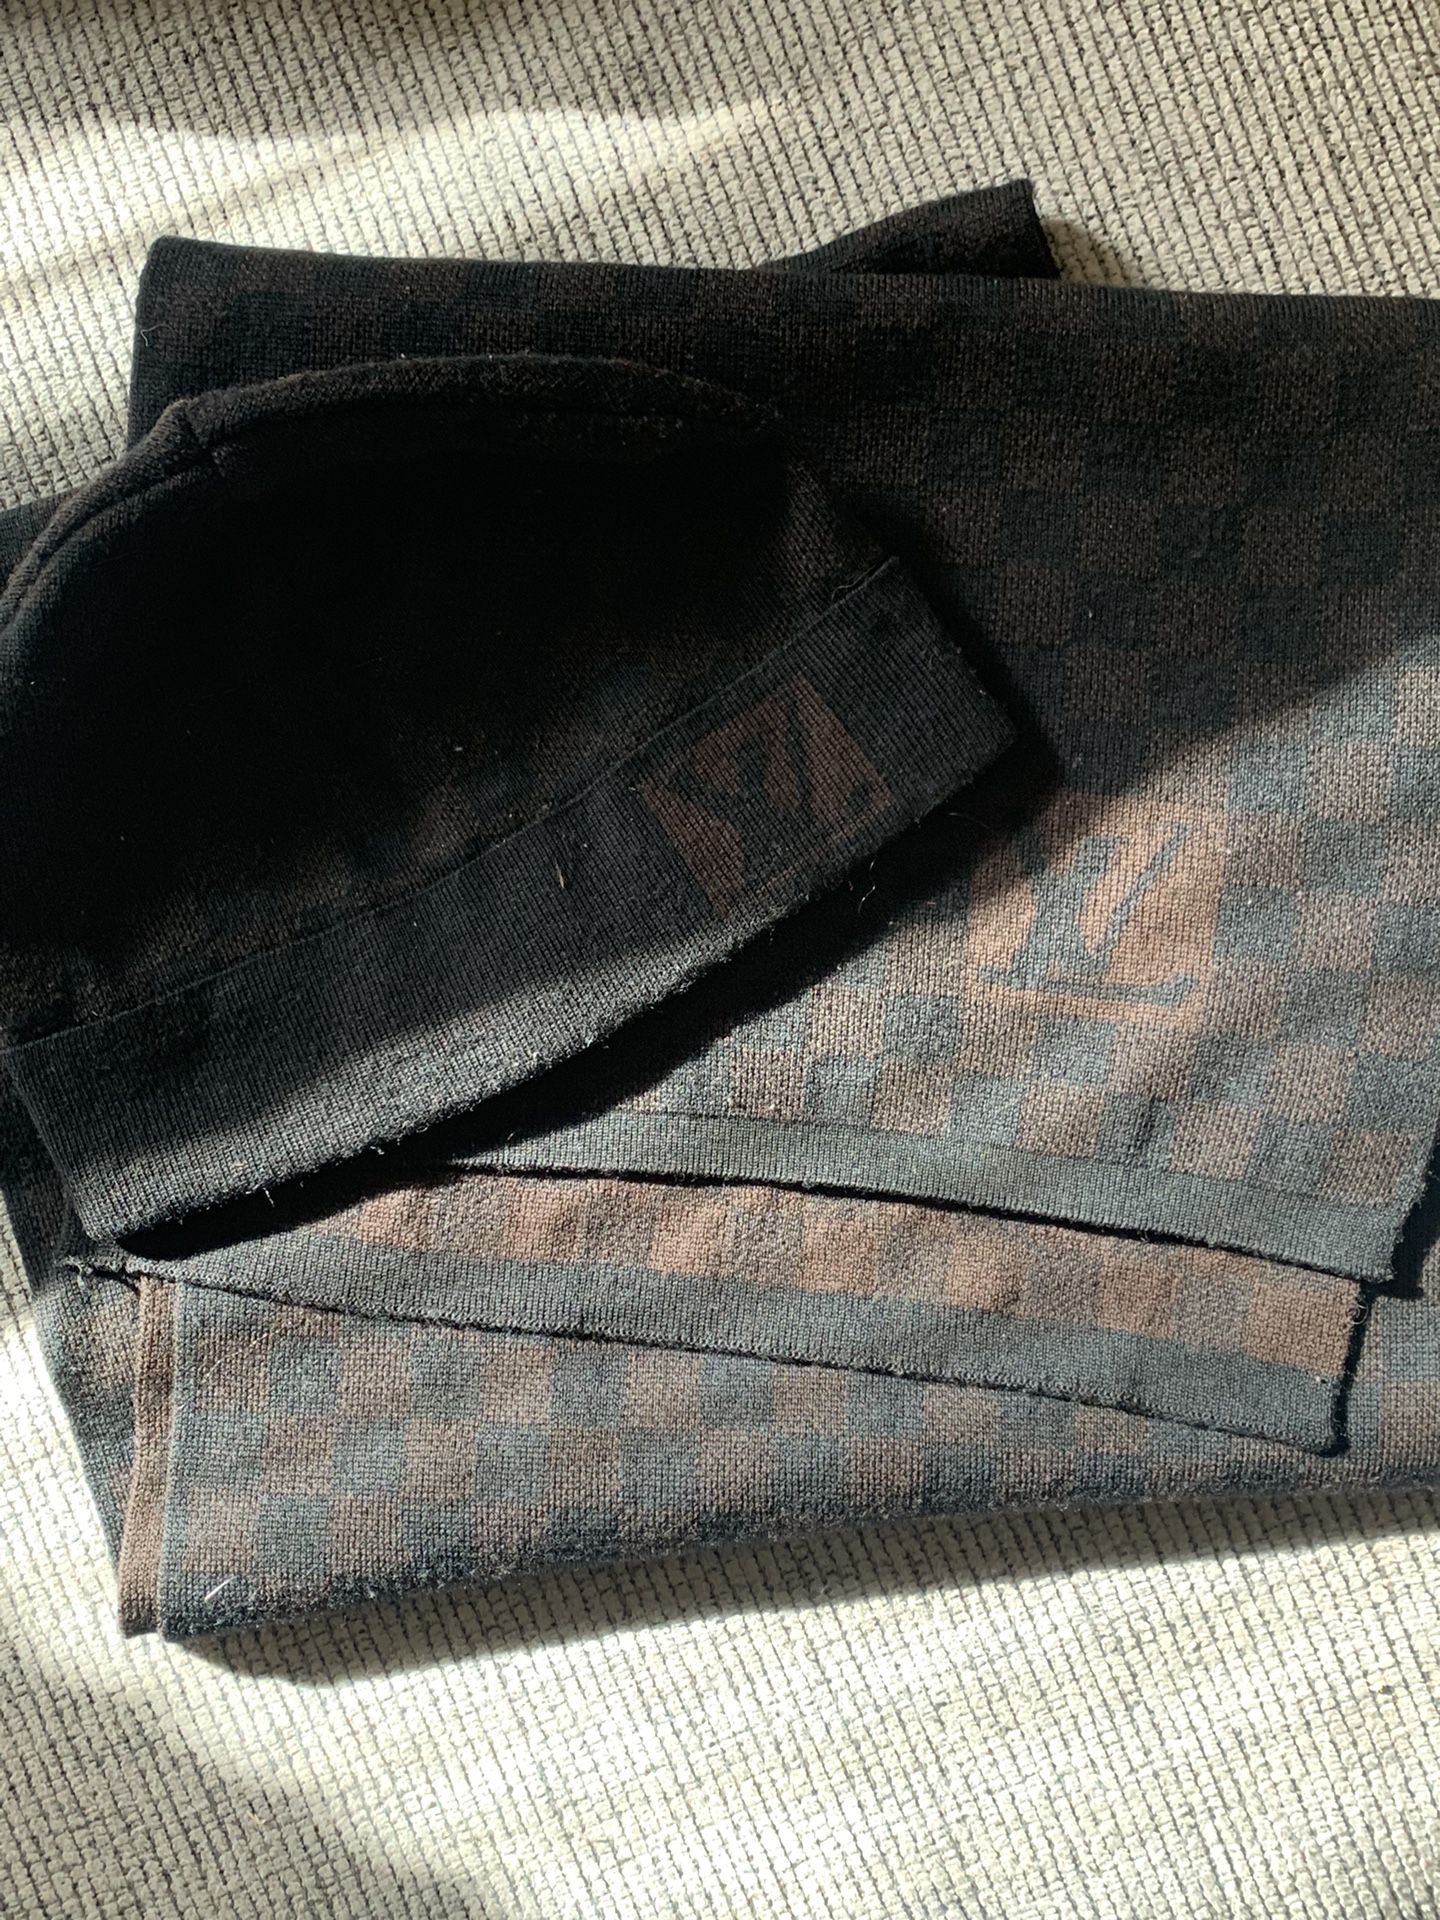 Authentic Damier Louis Vuitton Wool Scarf And Hat 